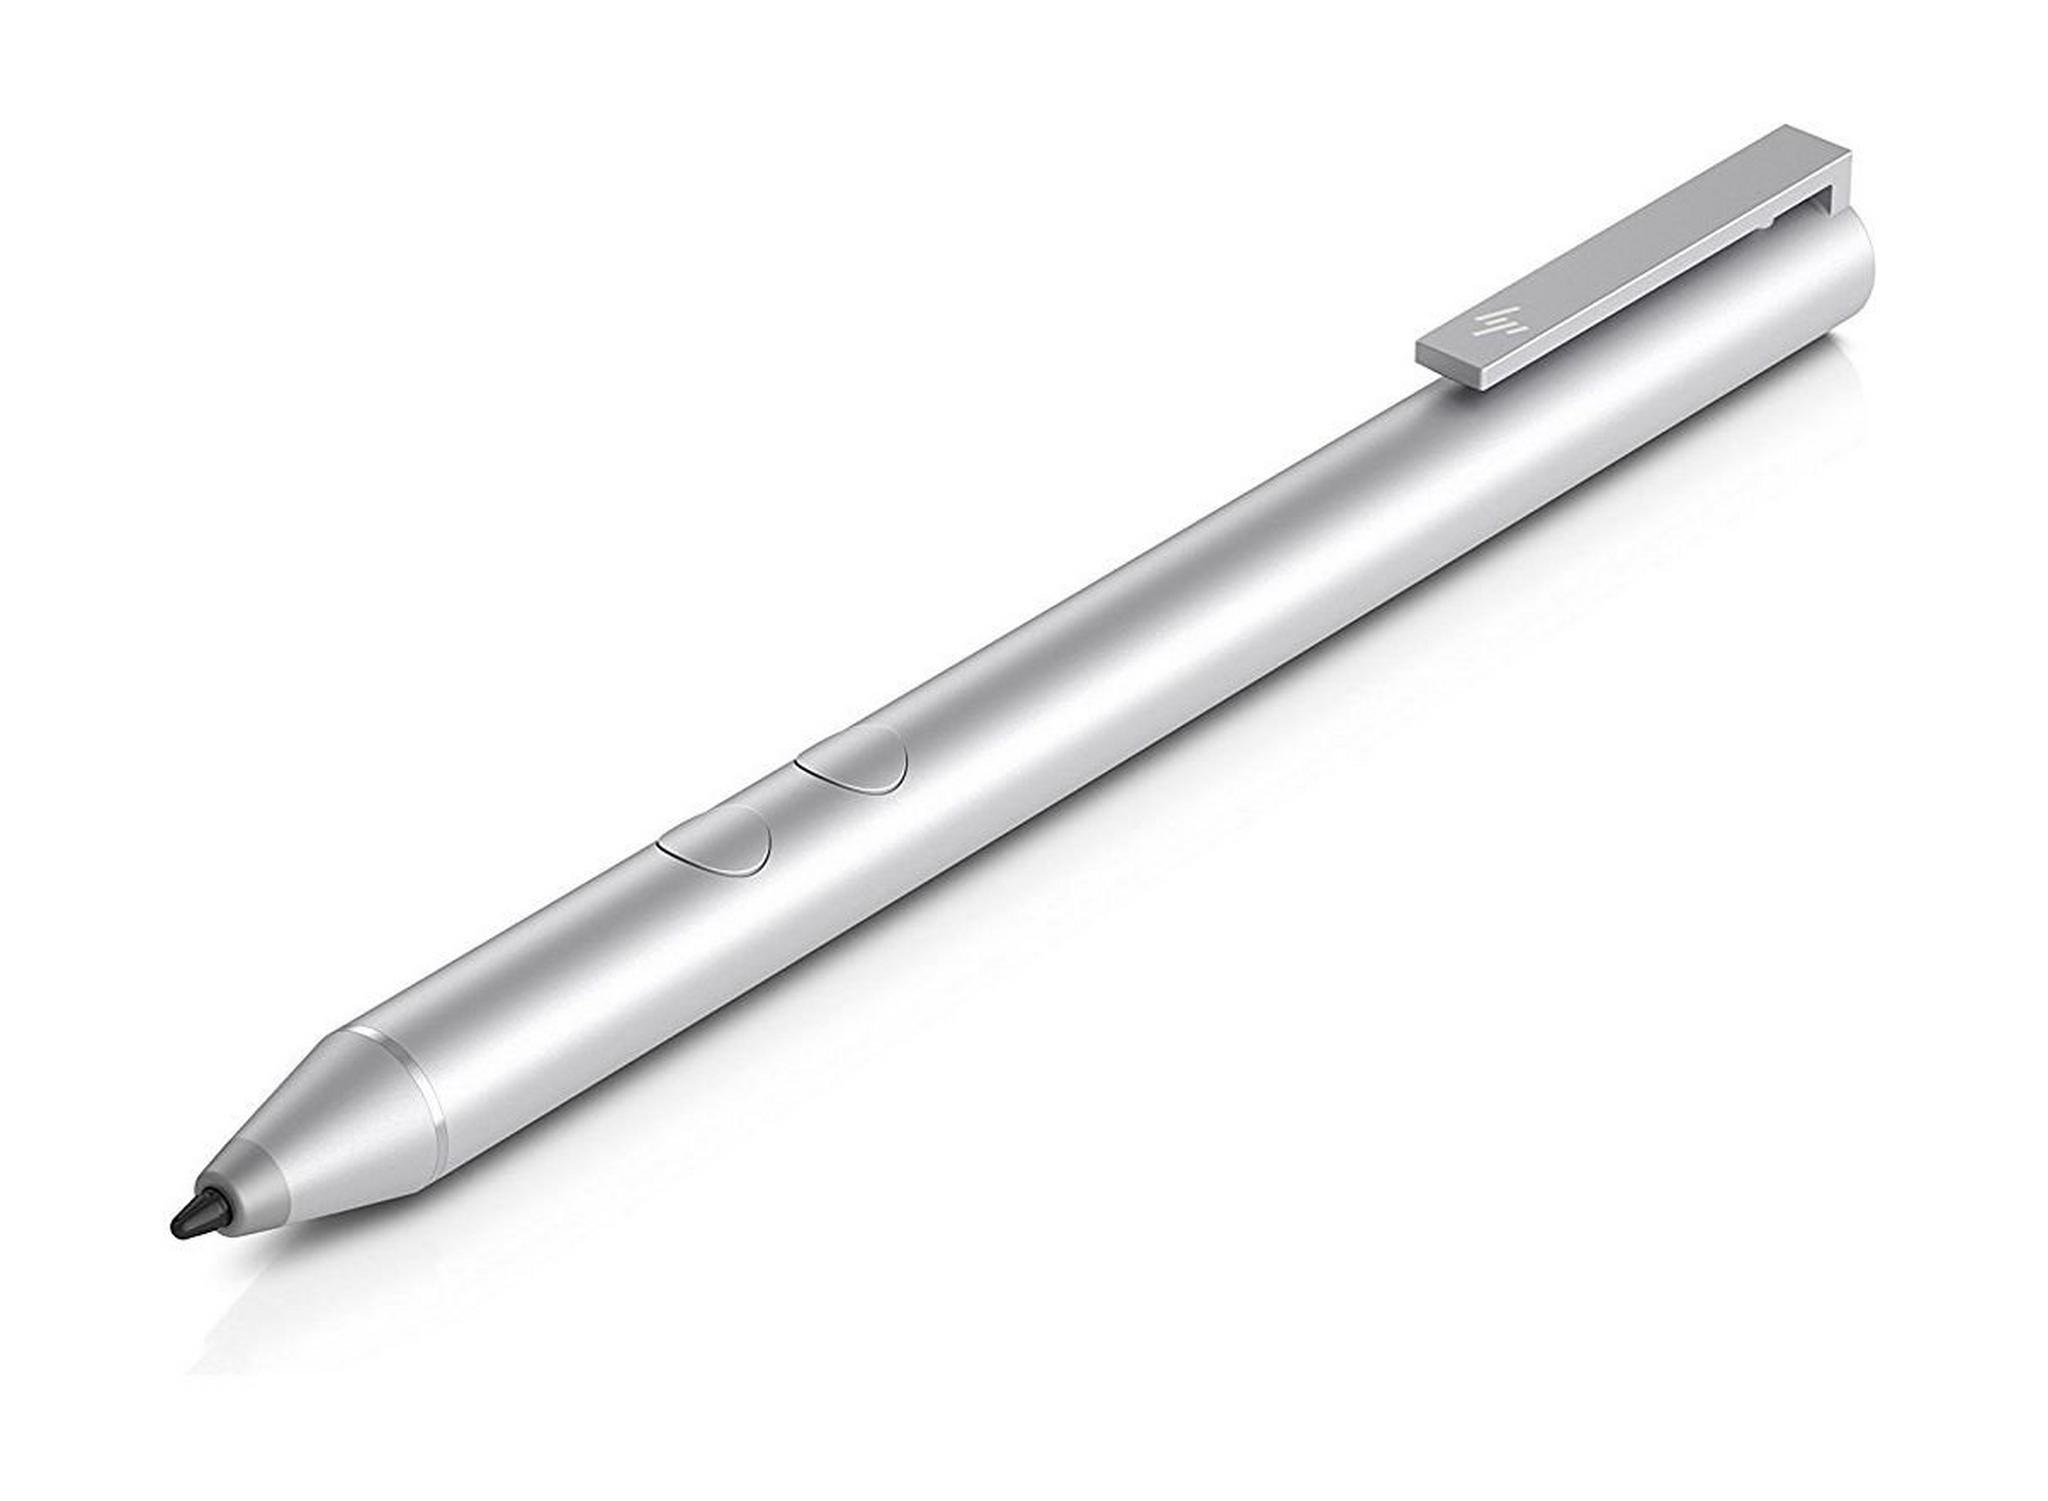 HP Digital Pen for Touchscreen Computers, Laptops and Tablets - 1MR94AA